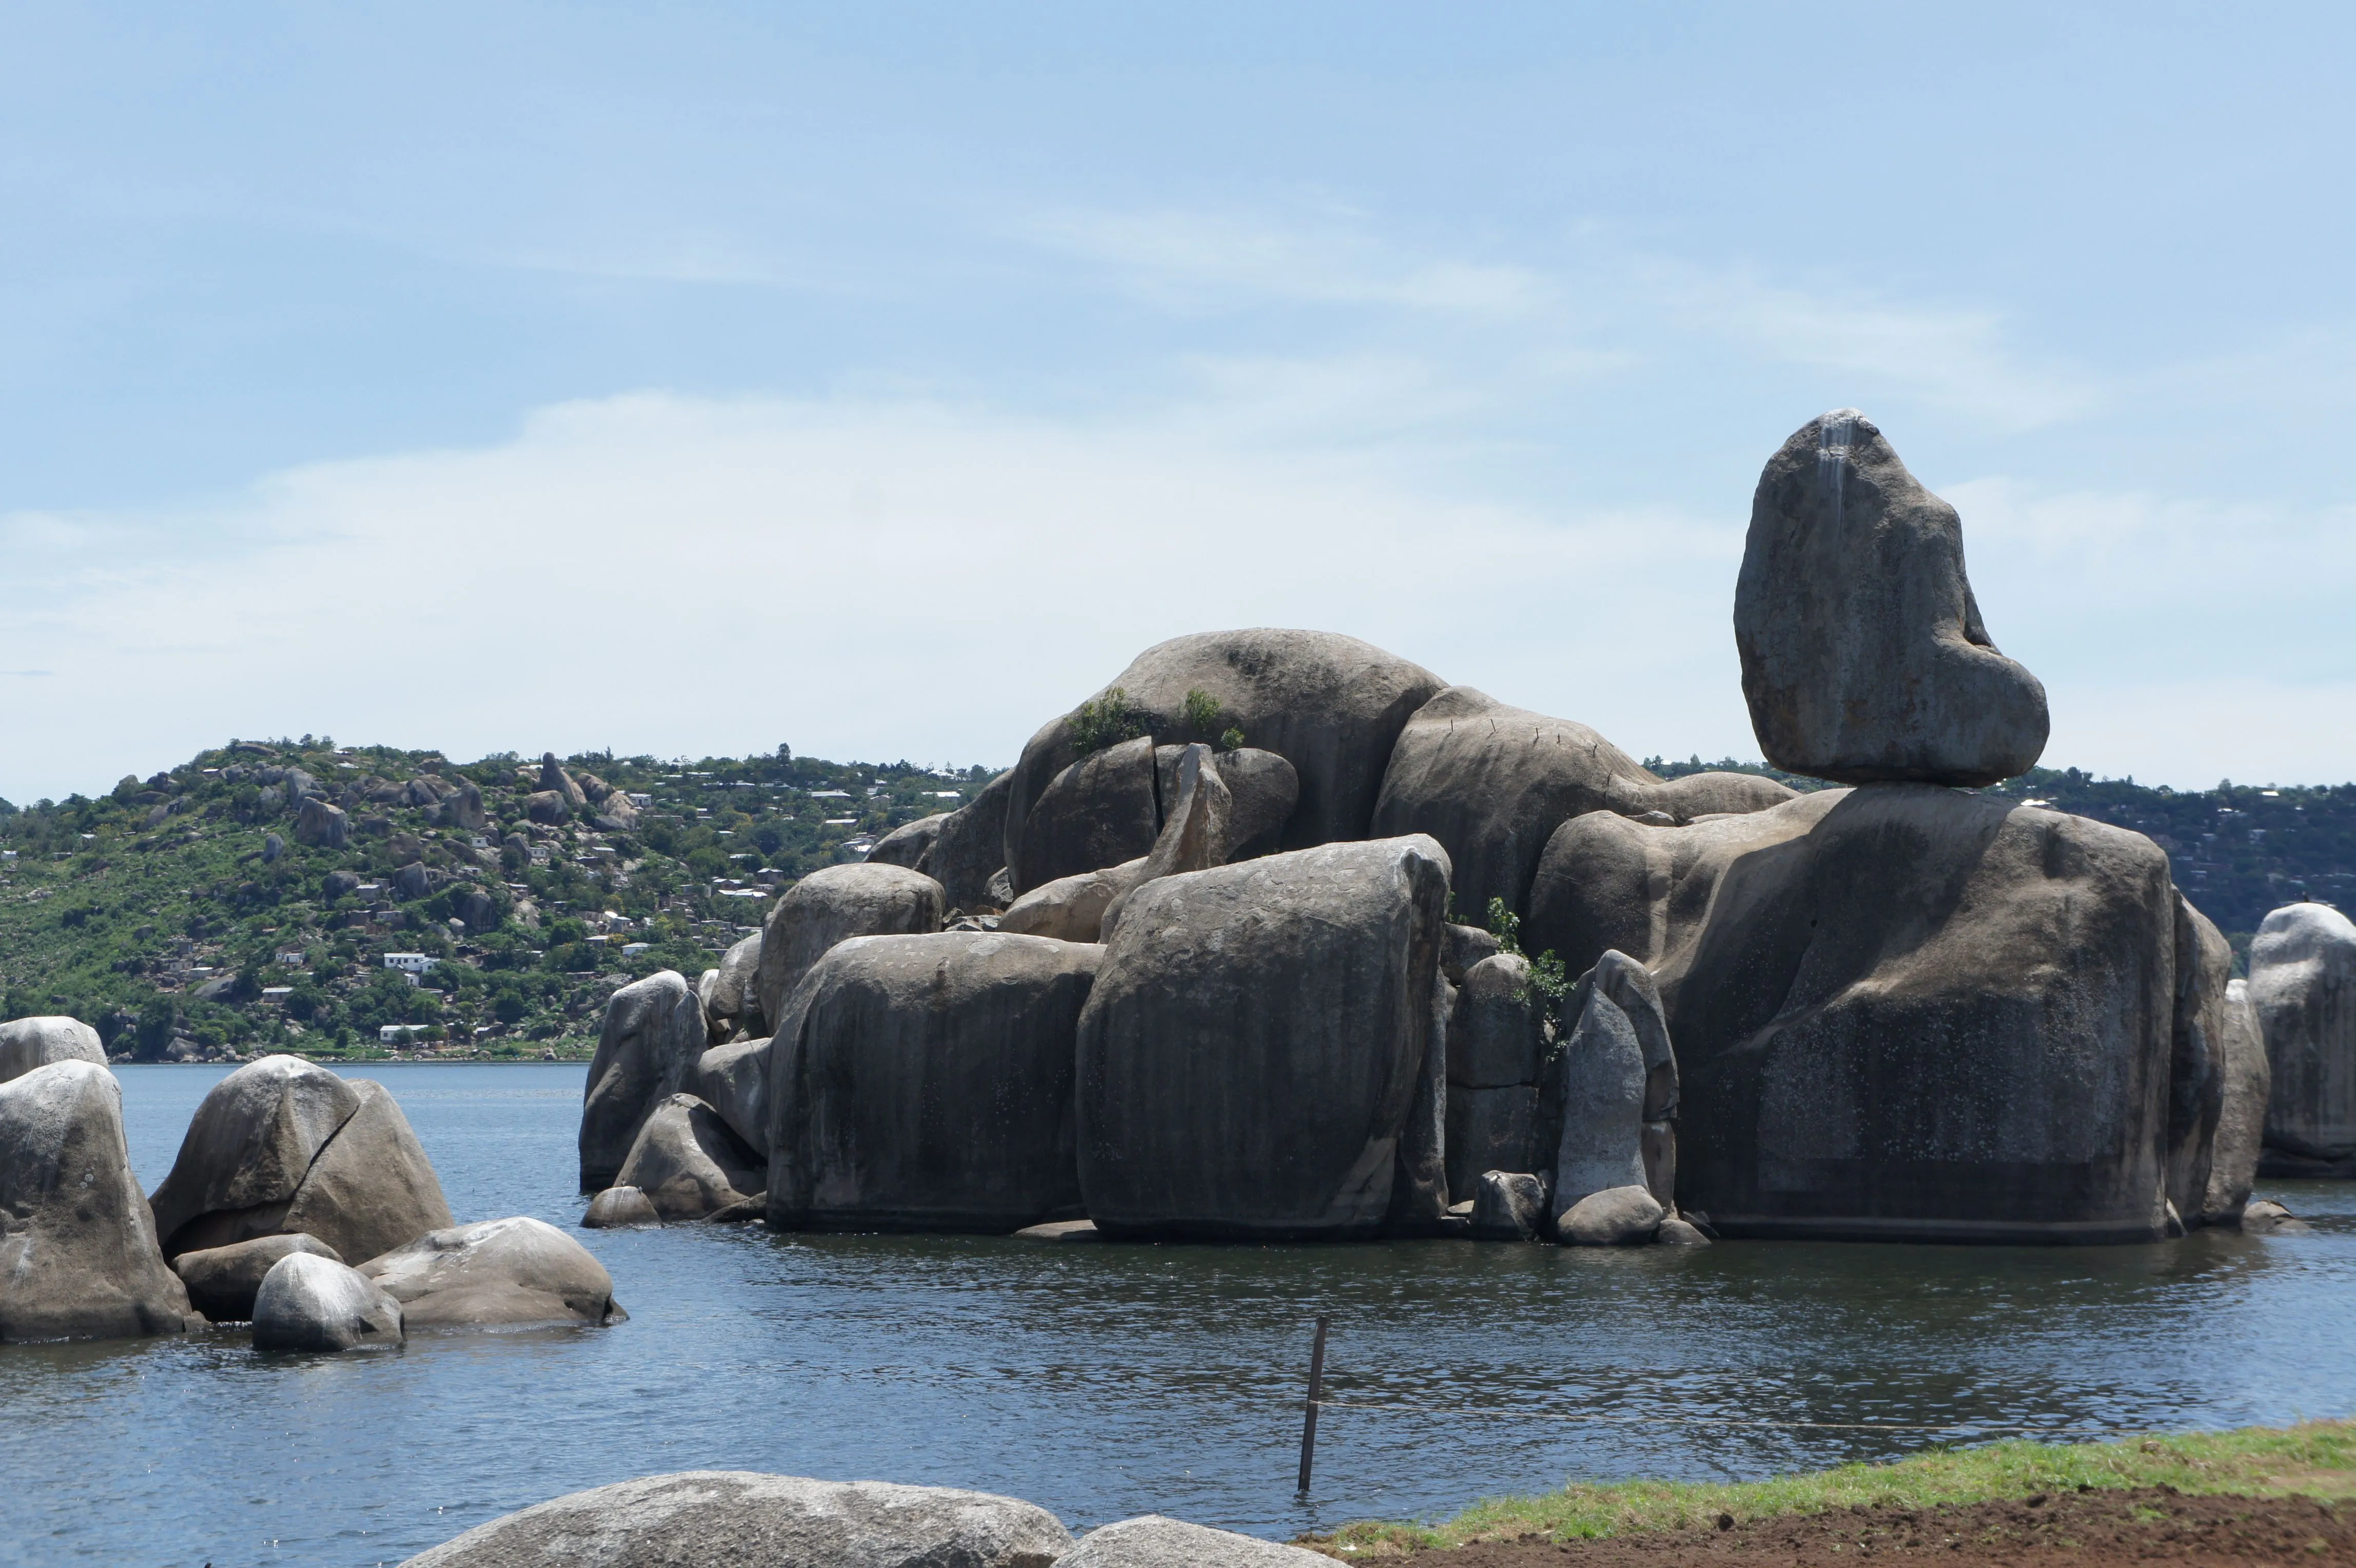 Bismarck Rock in Tanzania, Africa | Nature Reserves - Rated 3.6